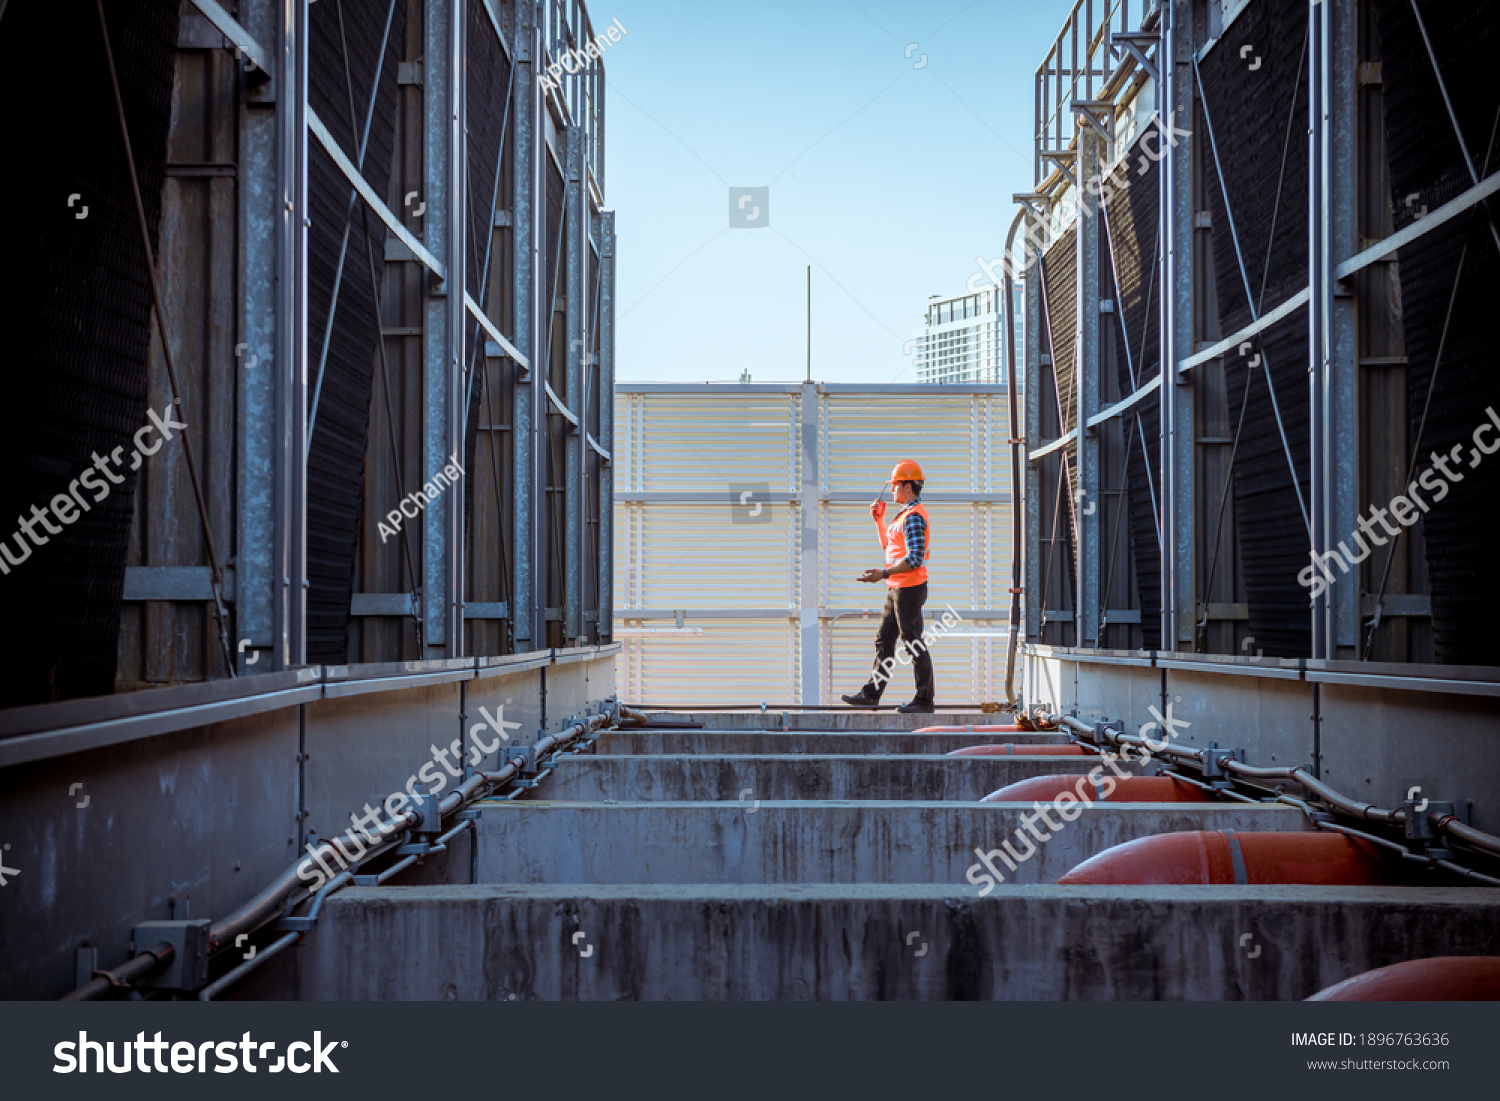 Engineer under checking the industry cooling tower air conditioner is water condenser cooling tower air chiller HVAC of large industrial building to control air system. #1896763636